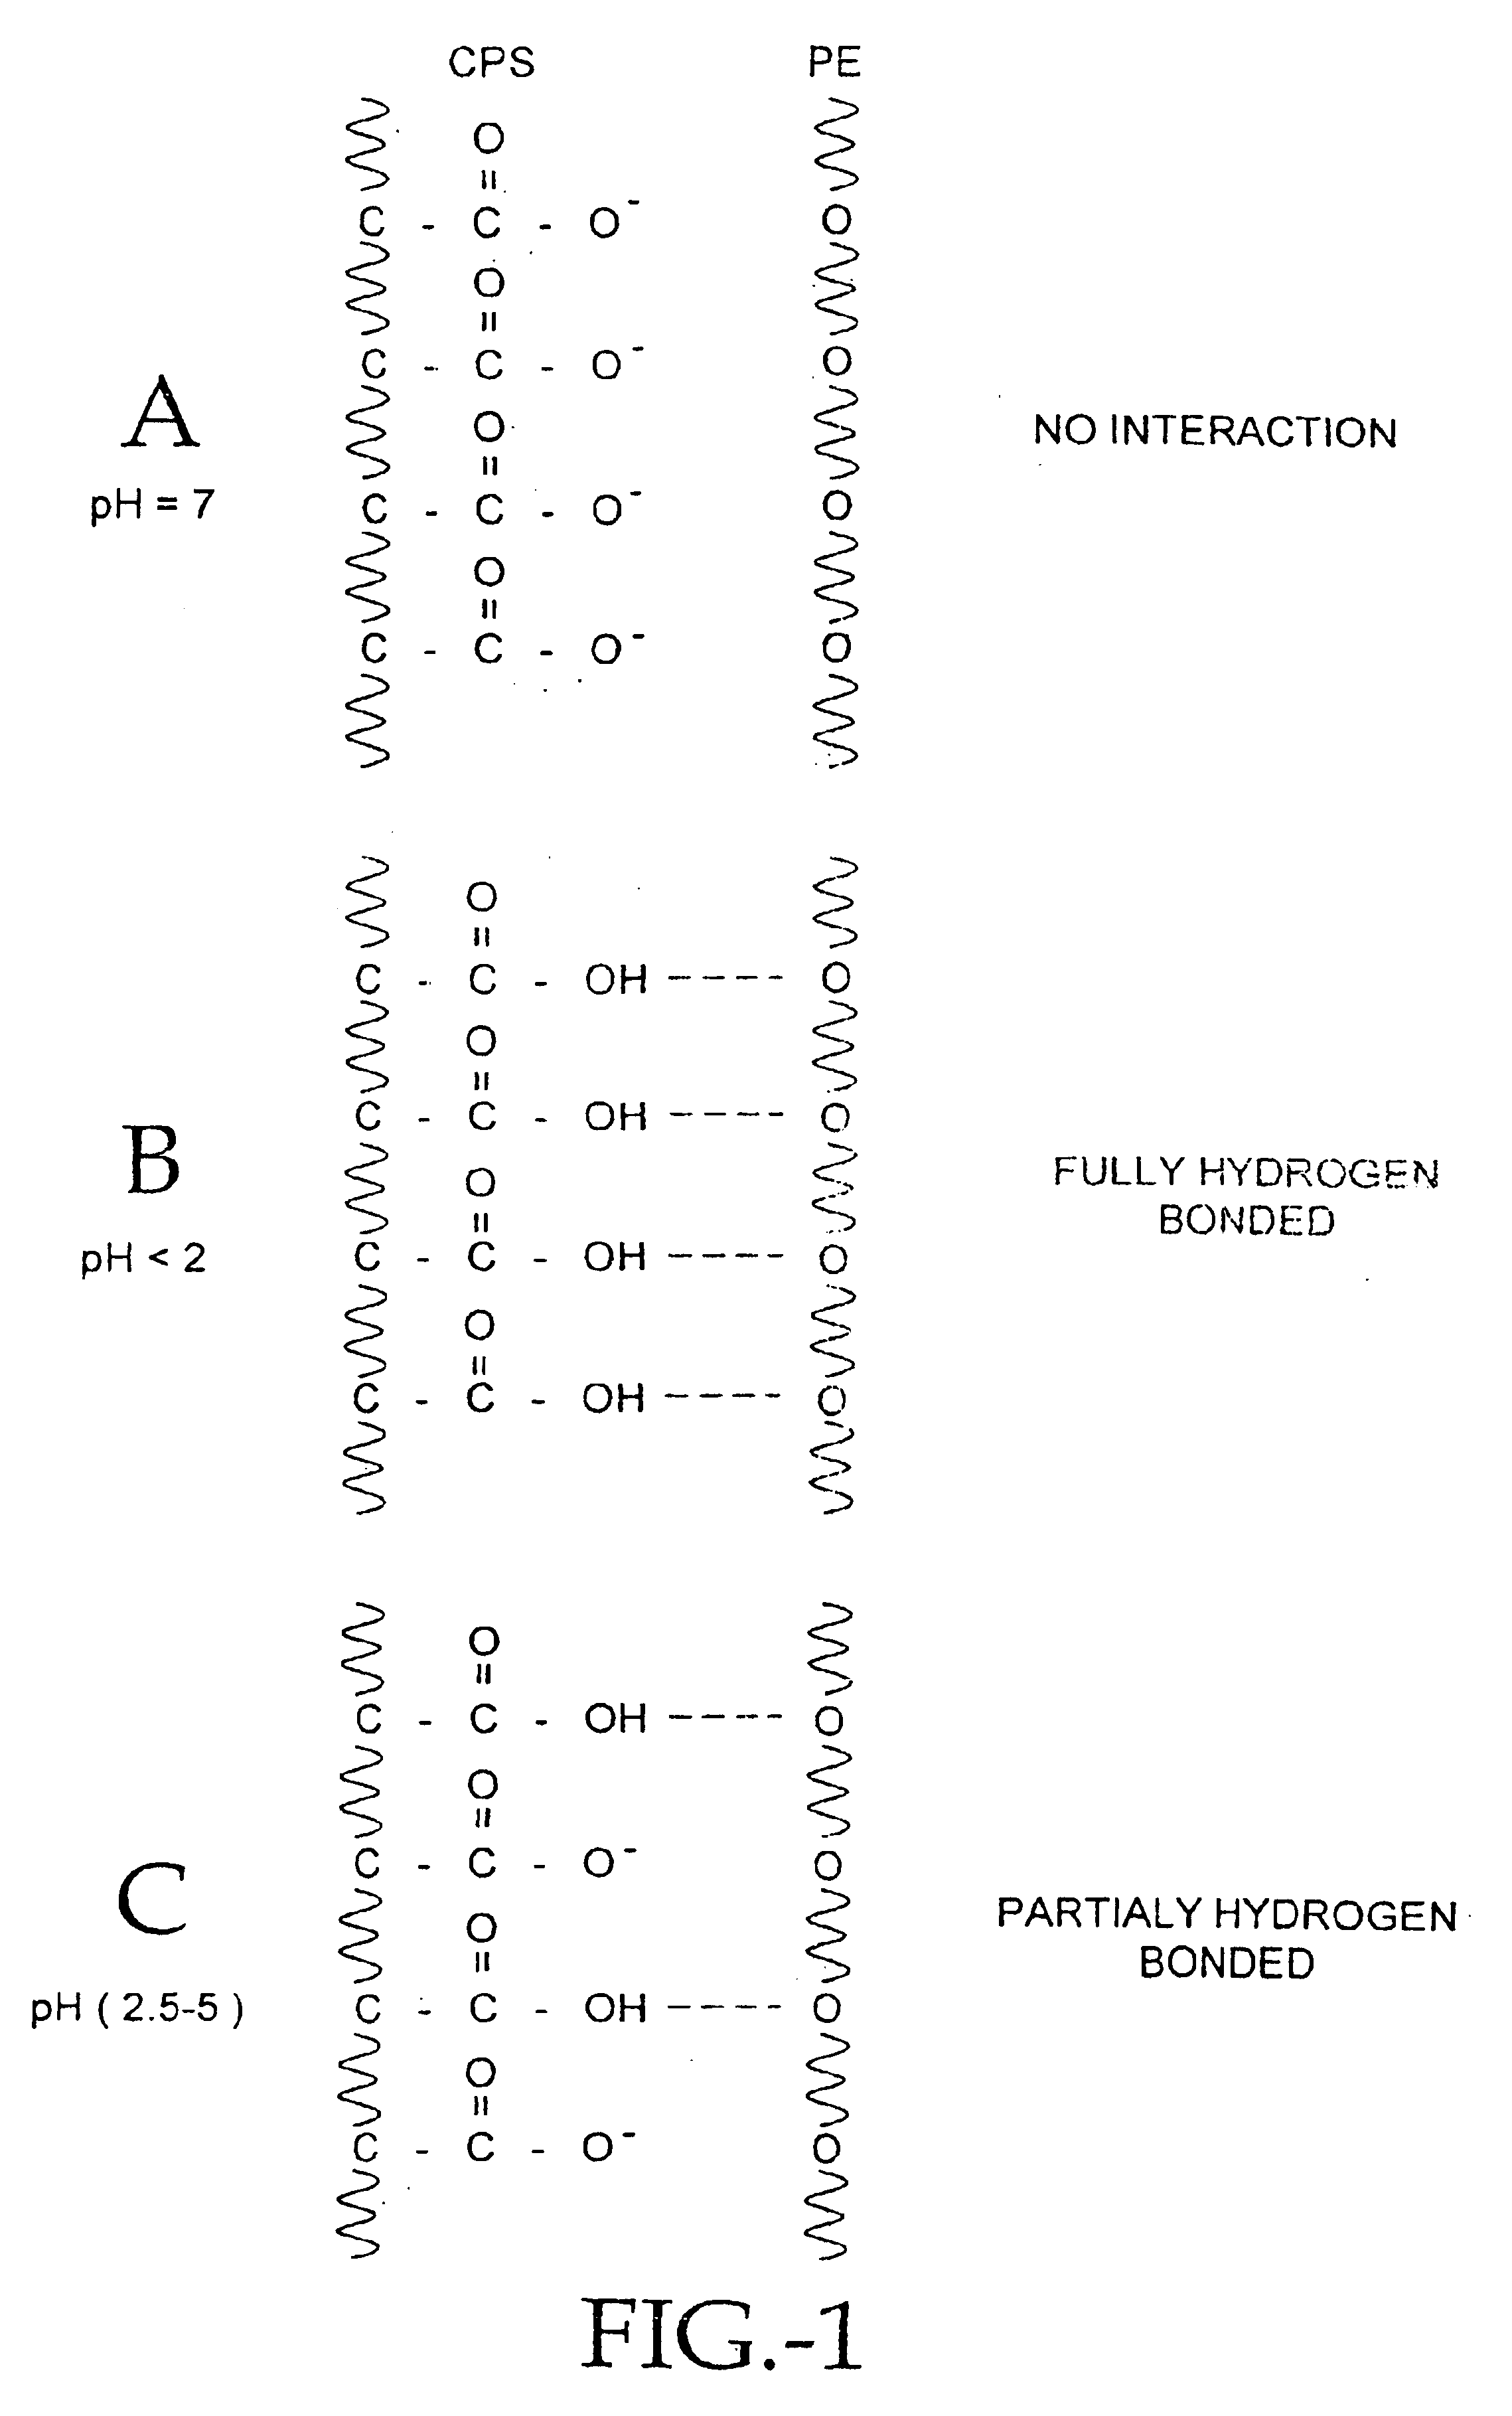 Compositions of polyacids and polyethers and methods for their use in reducing adhesions